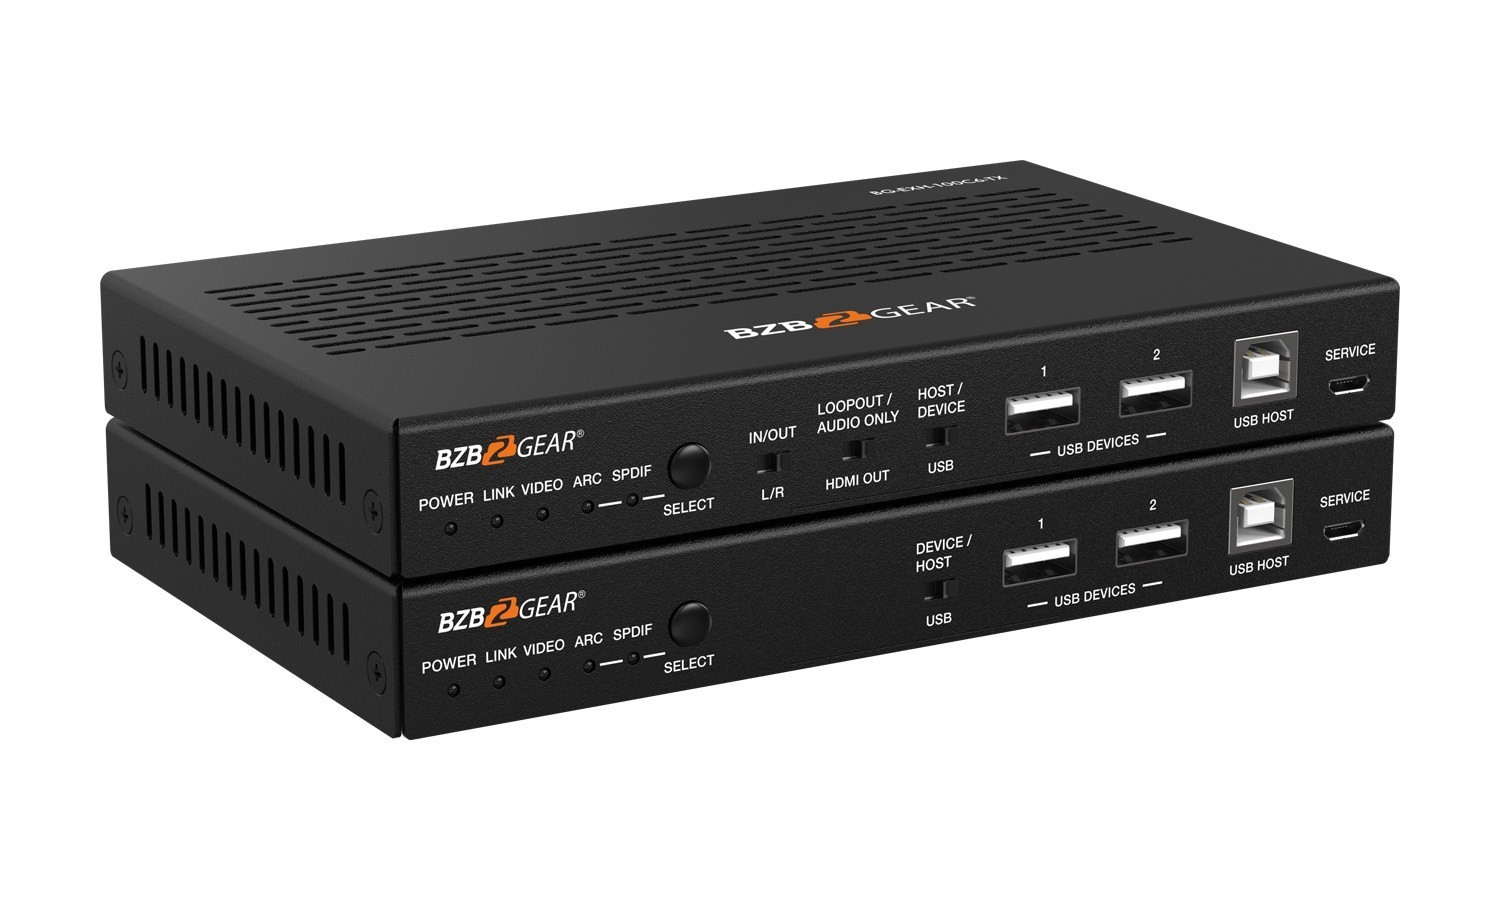 BG-EXH-100C6 4K UHD HDMI/HDBaseT 3.0 Extender with IR/eARC/ARC/PoC/RS-232/Ethernet/USB and Audio Embedding/De-embedding up to 330ft by BZBGEAR